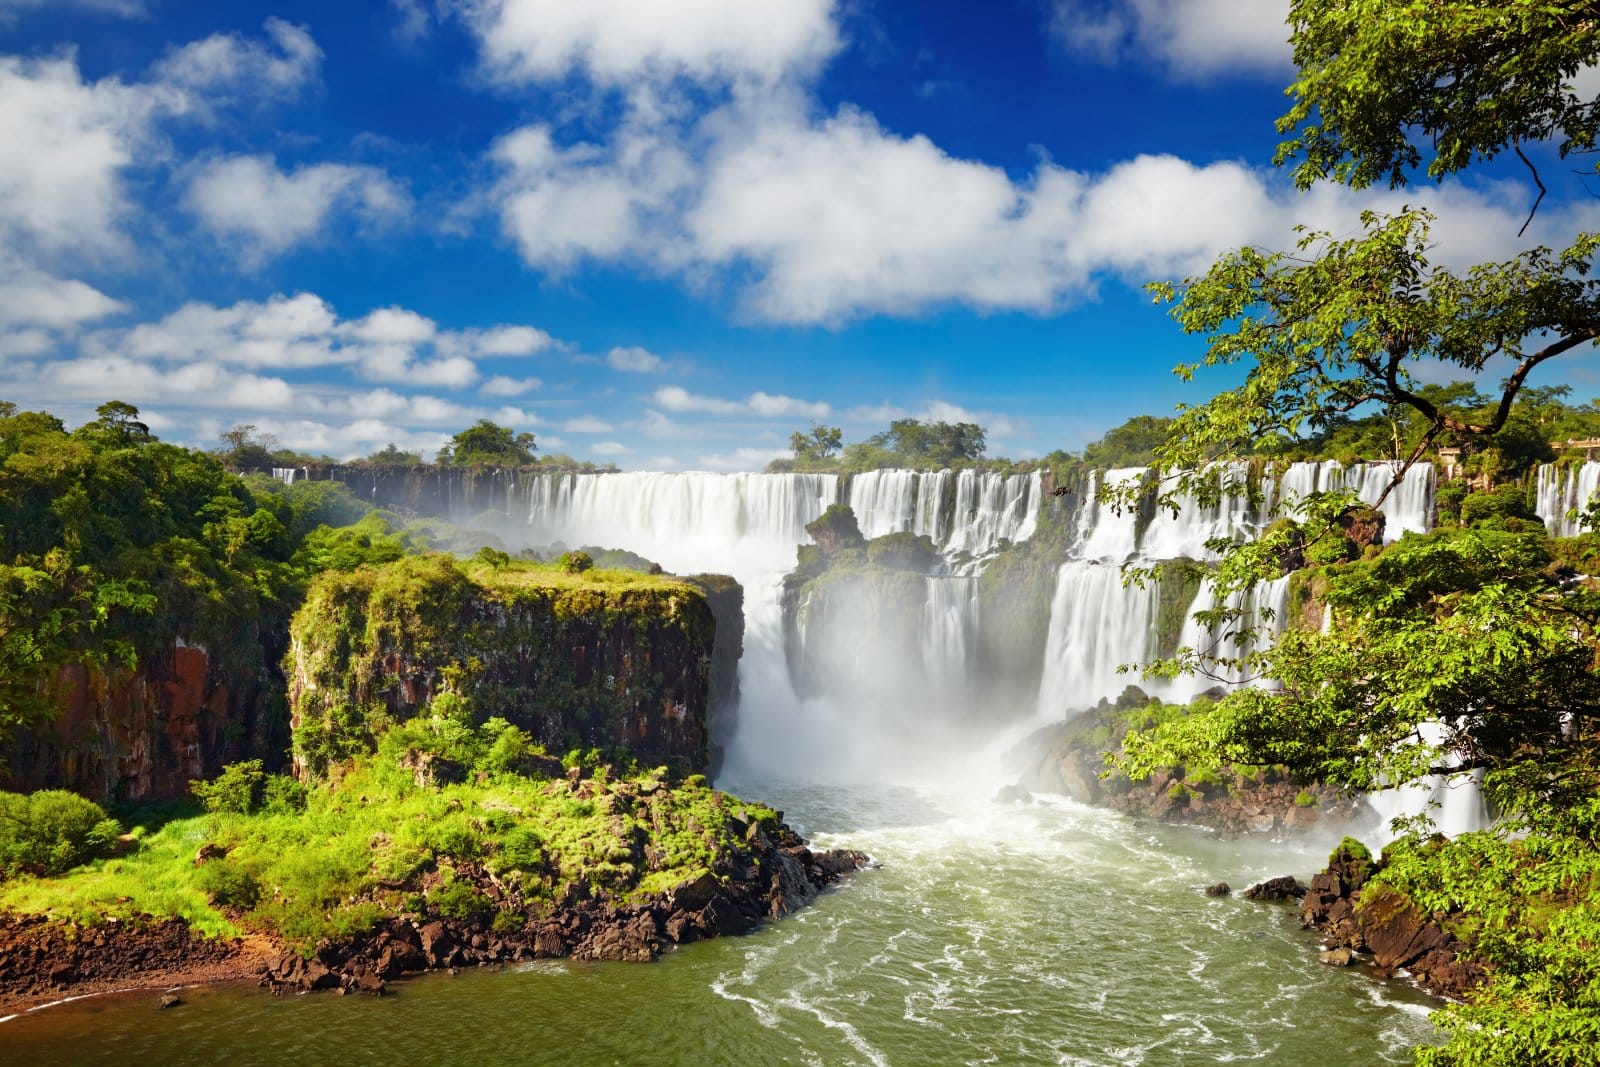 <p class="wp-caption-text">Image Credit: Shutterstock / Dmitry Pichugin</p>  <p>Experience the sheer power and natural beauty of Iguazú Falls from a thrilling perspective as you take to the skies on a hang gliding adventure. Soar above the roaring cascades and misty rainbows, feeling the rush of wind against your skin as you glide over one of the world’s most spectacular waterfalls.</p>